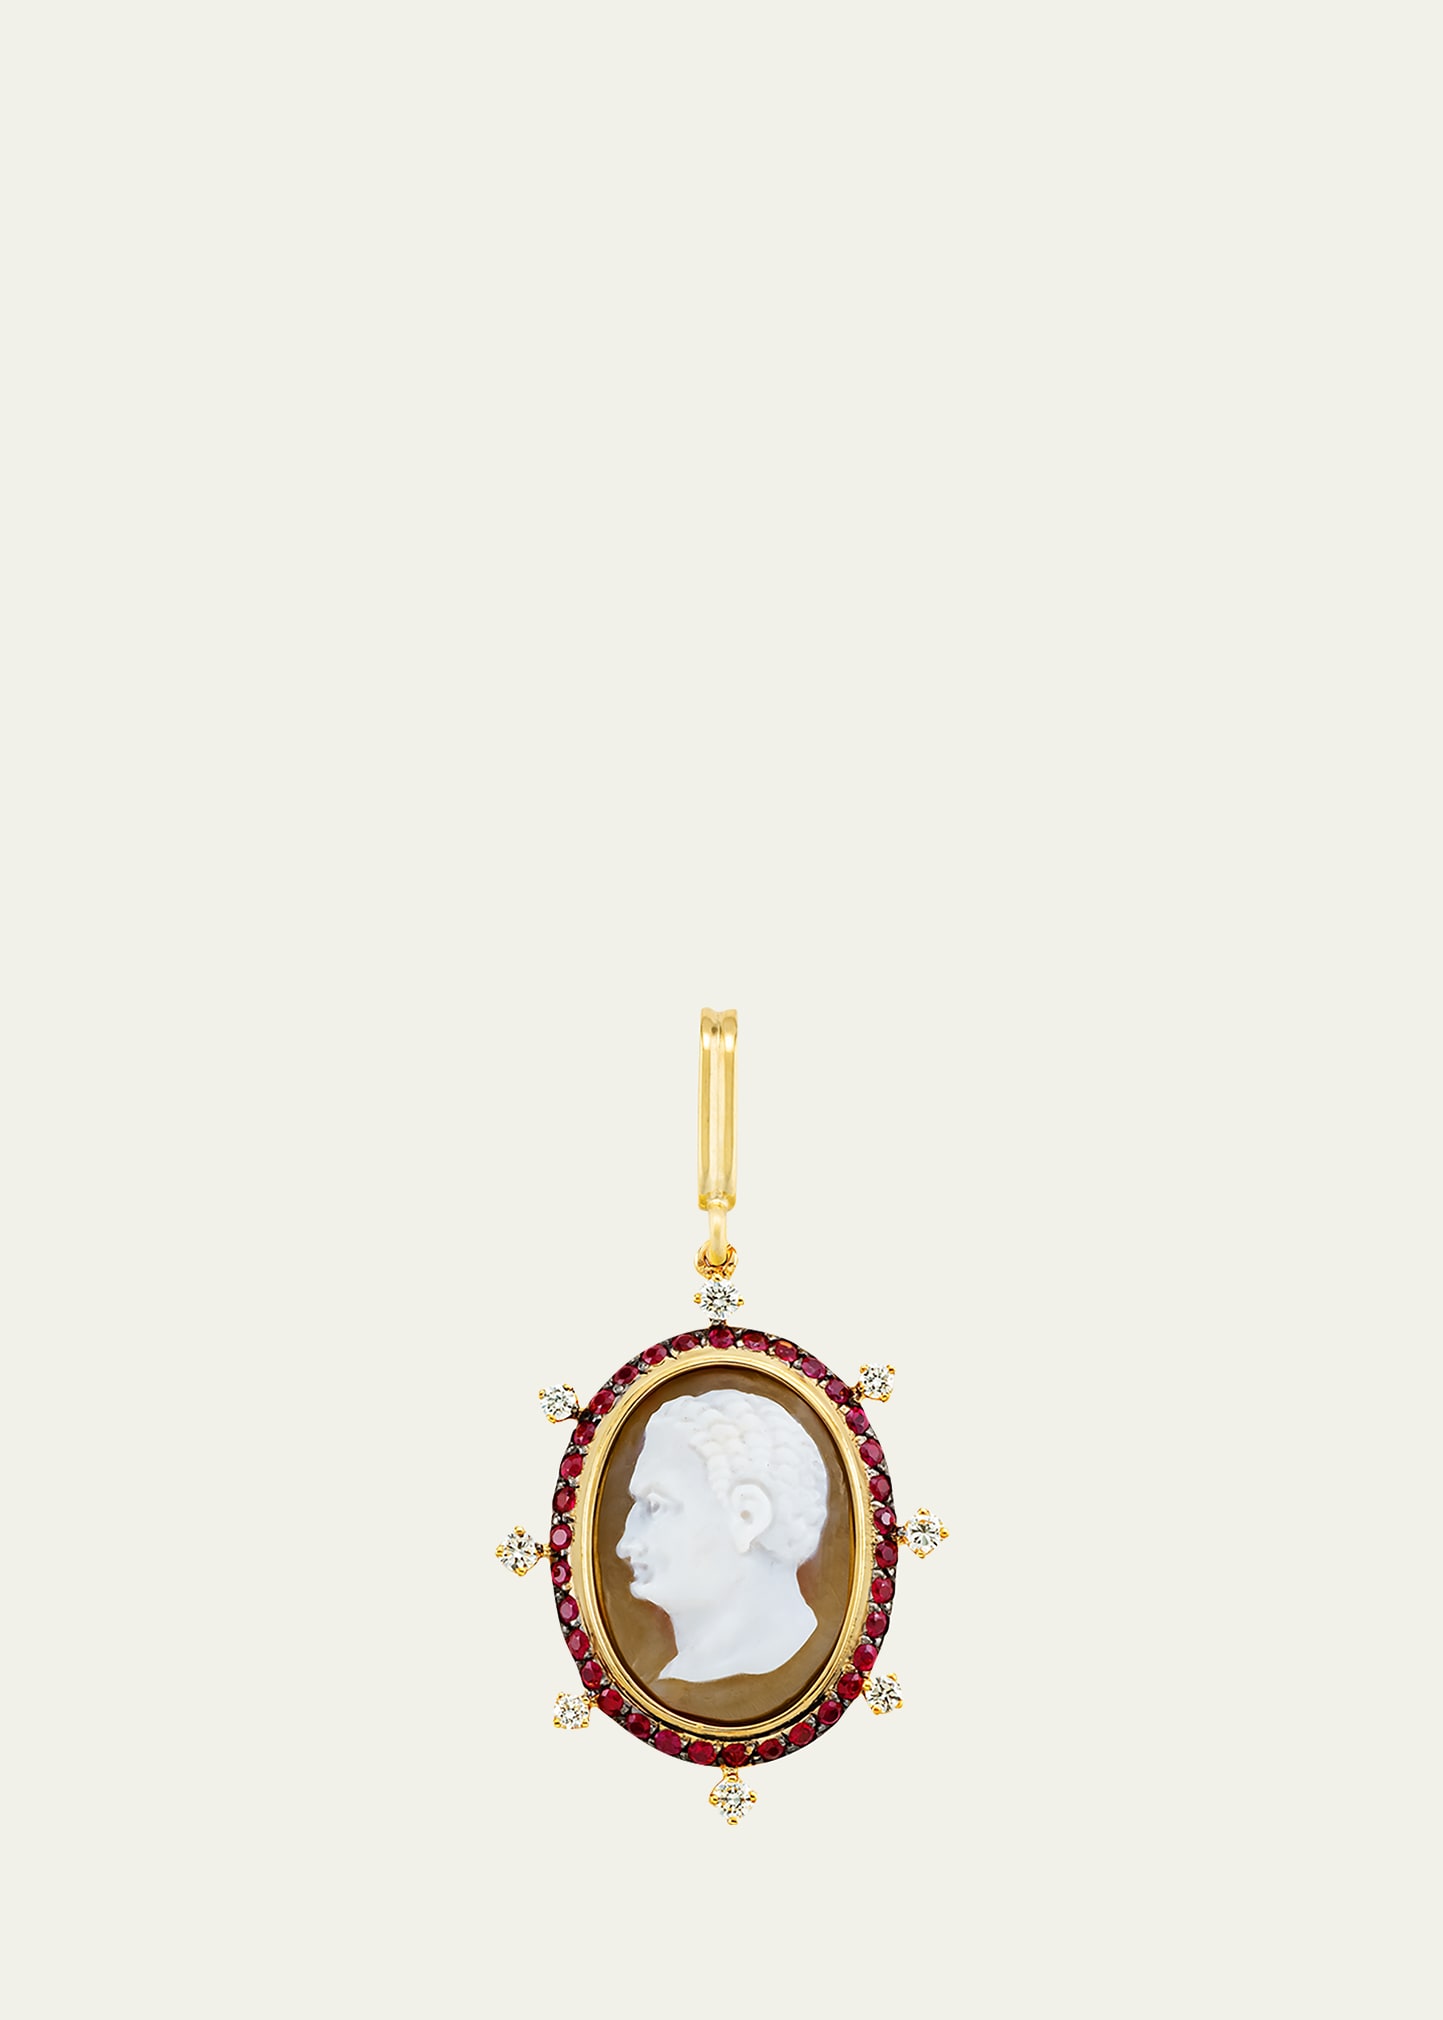 18K Yellow Gold Previous Cameo Charm with Shell, Diamonds and Rubies